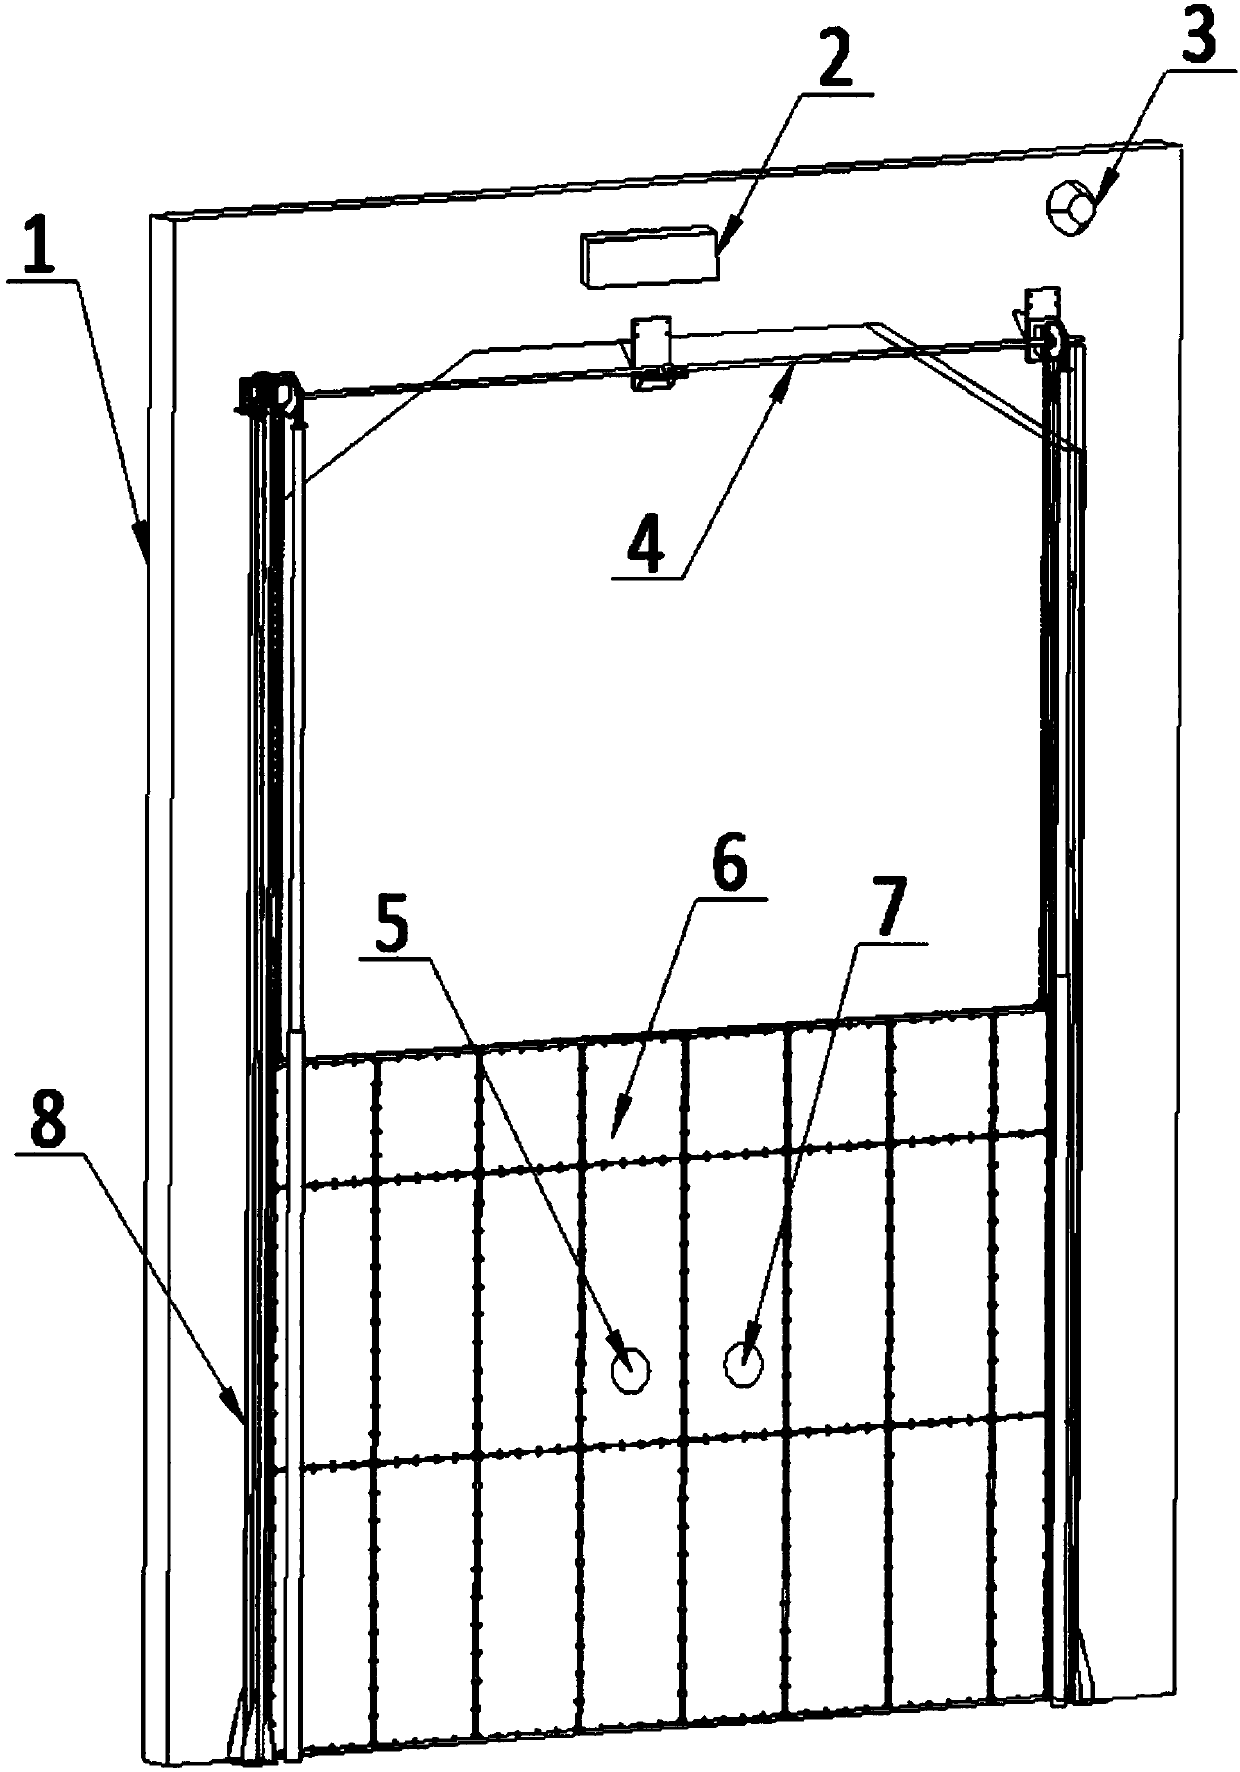 An automatic opening and closing explosion-proof and fire-proof safety door device